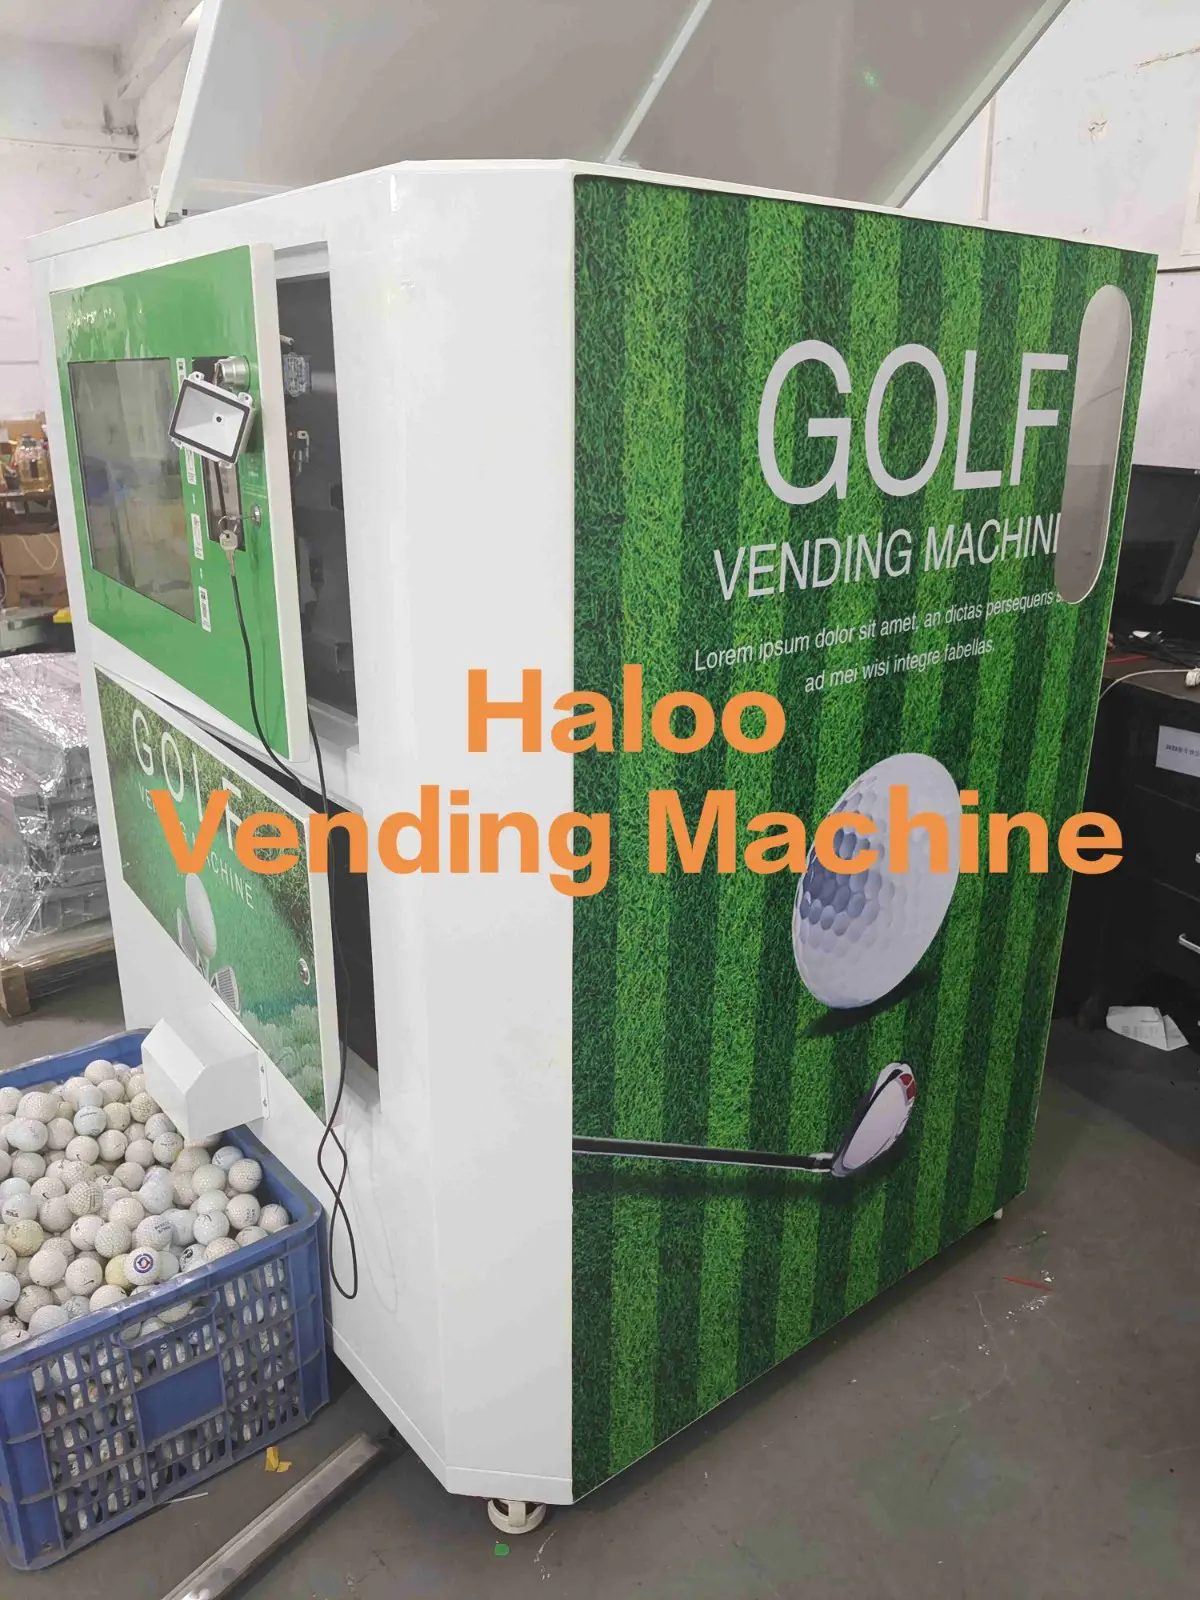 Professional vice golf ball vending machine manufacturer for shopping mall